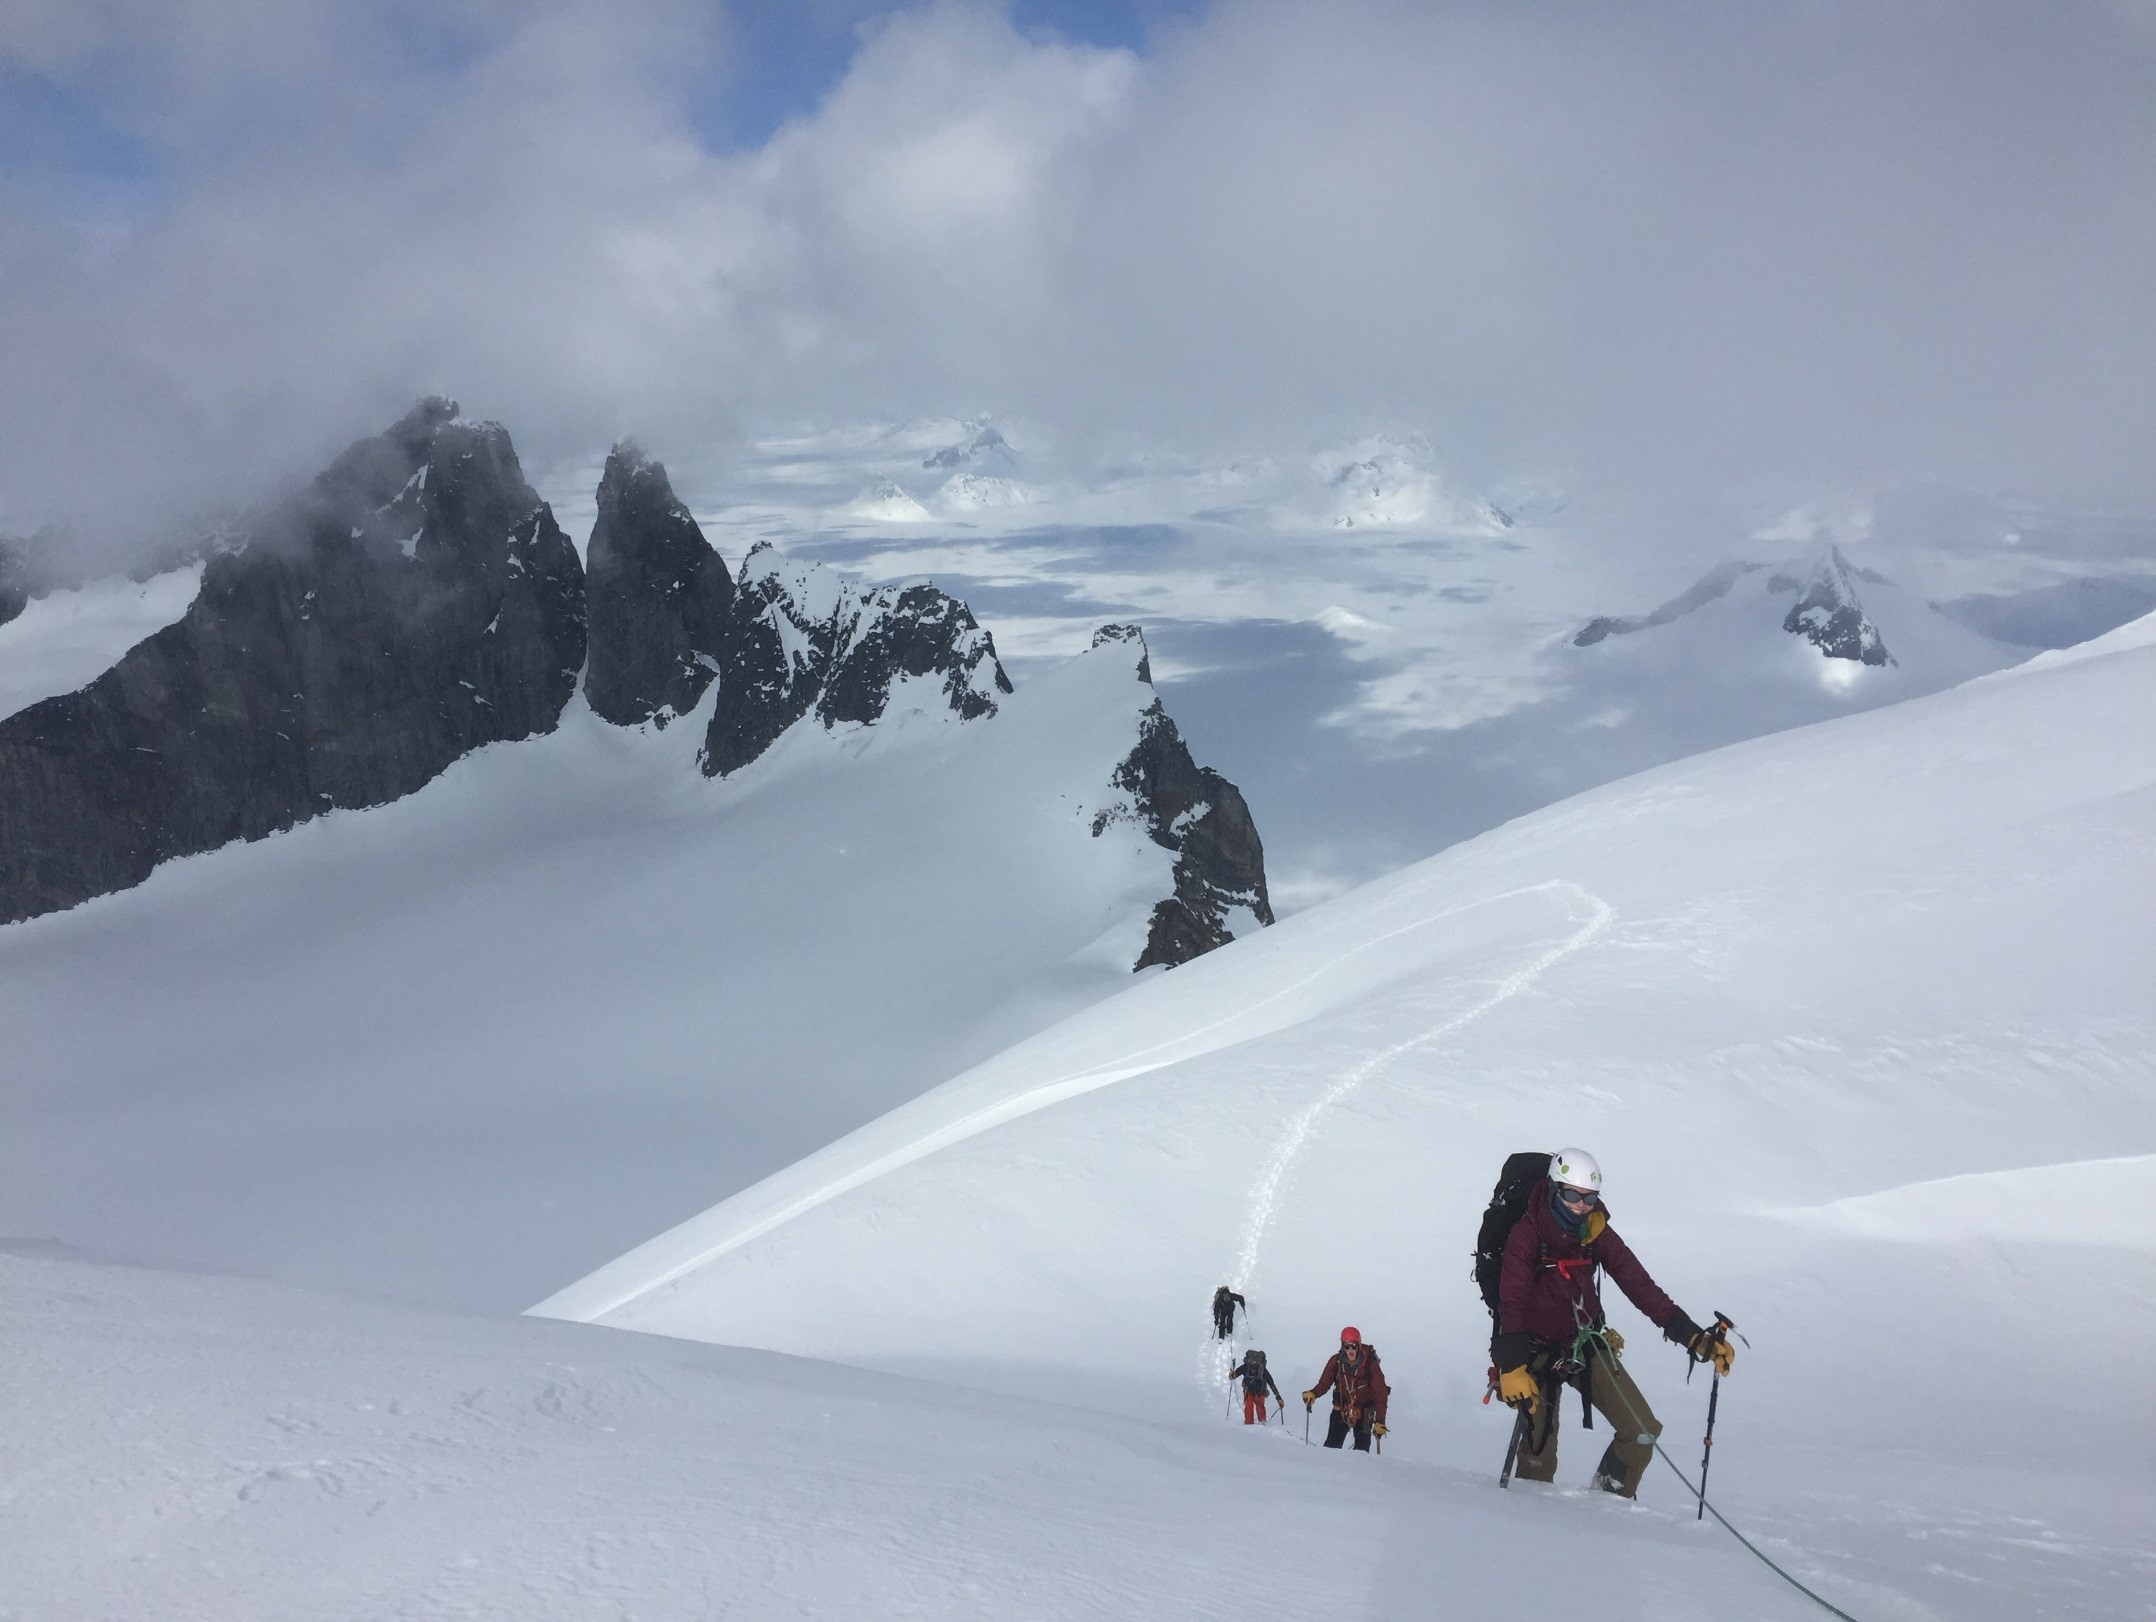 Katie McCaffrey approaches the Summit of Emperor Peak on April 15, the Taku Towers are behind.